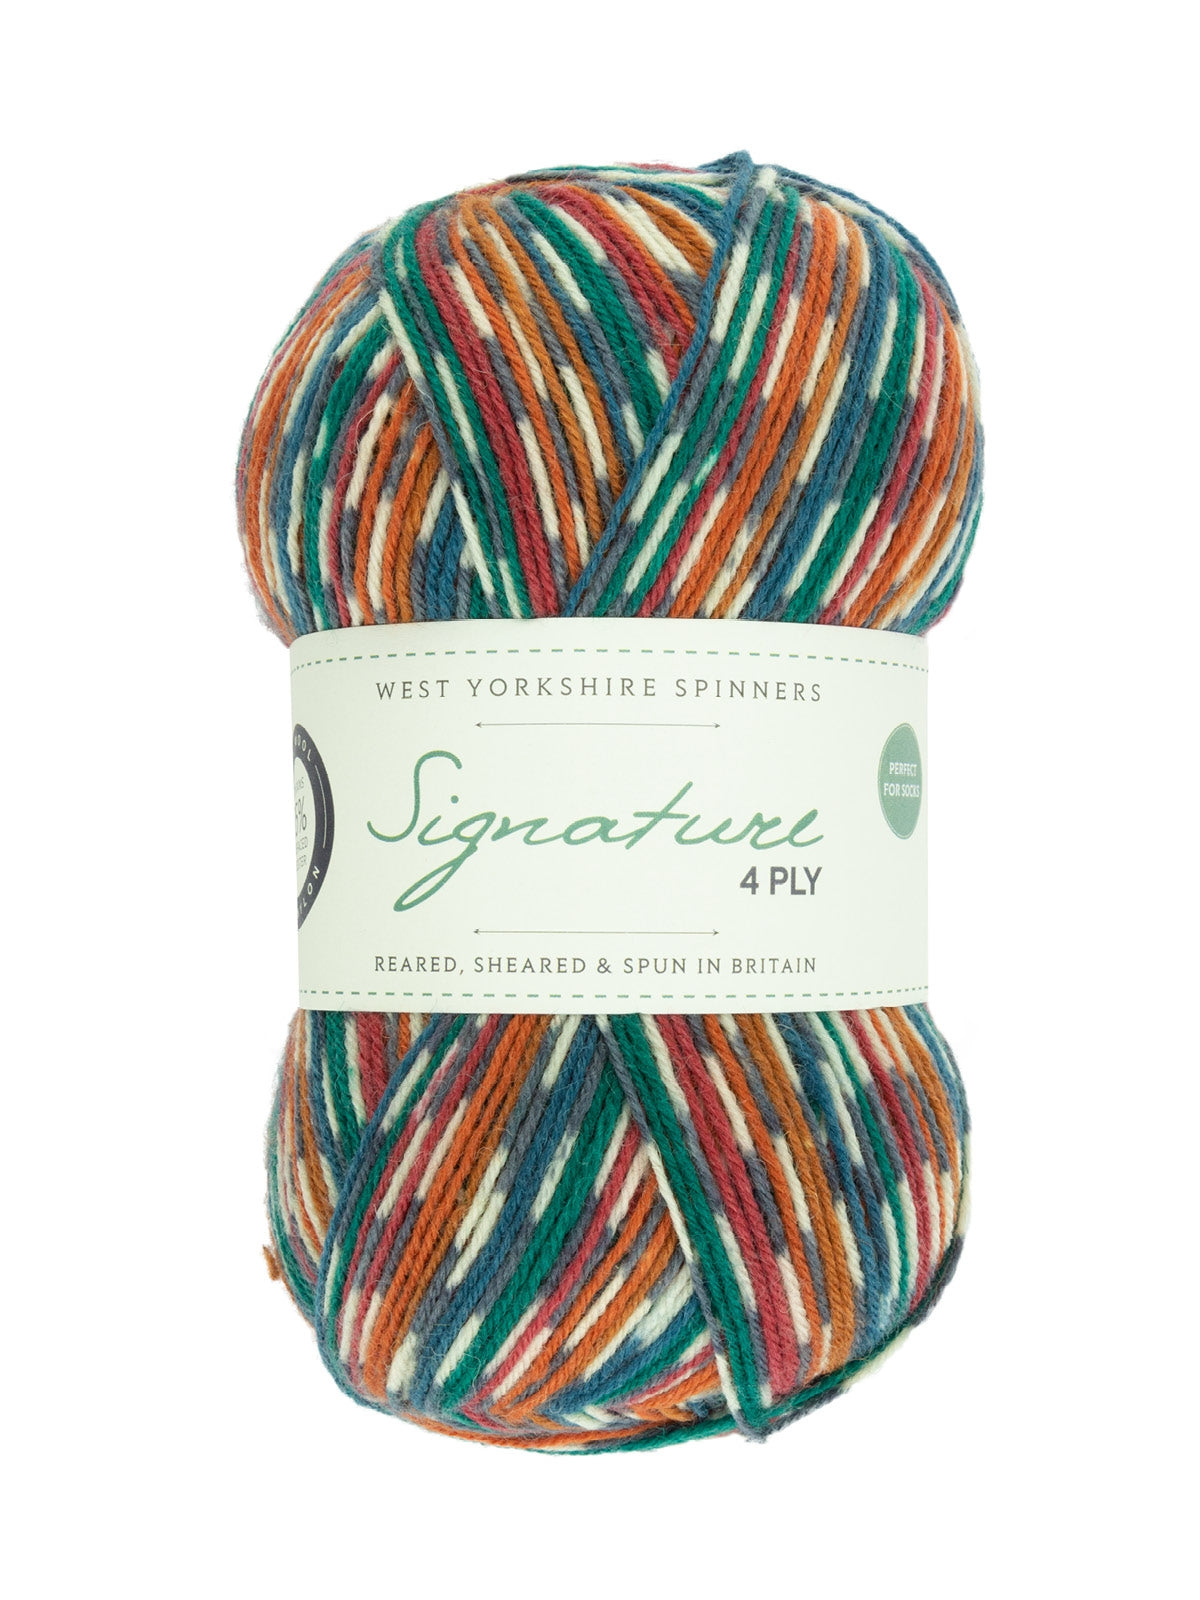 West Yorkshire Spinners Signature 4-Ply - Pheasant